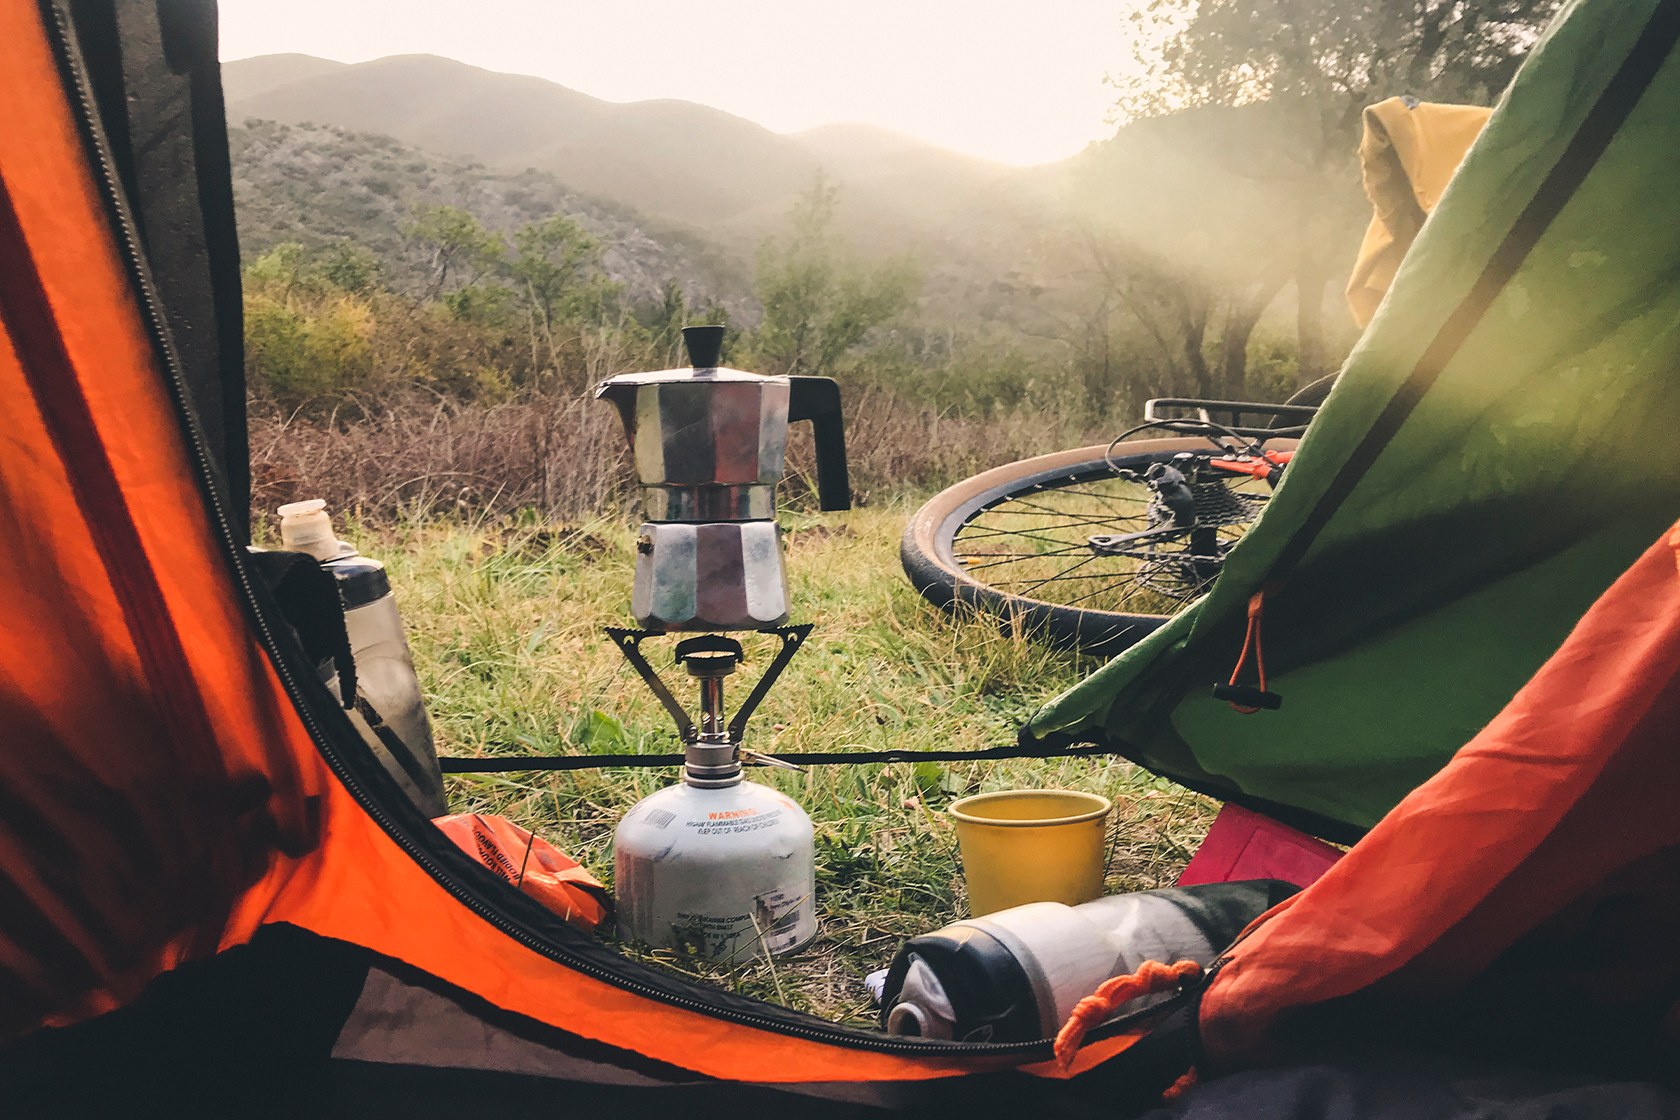 The best camping accessories for your outdoor adventures